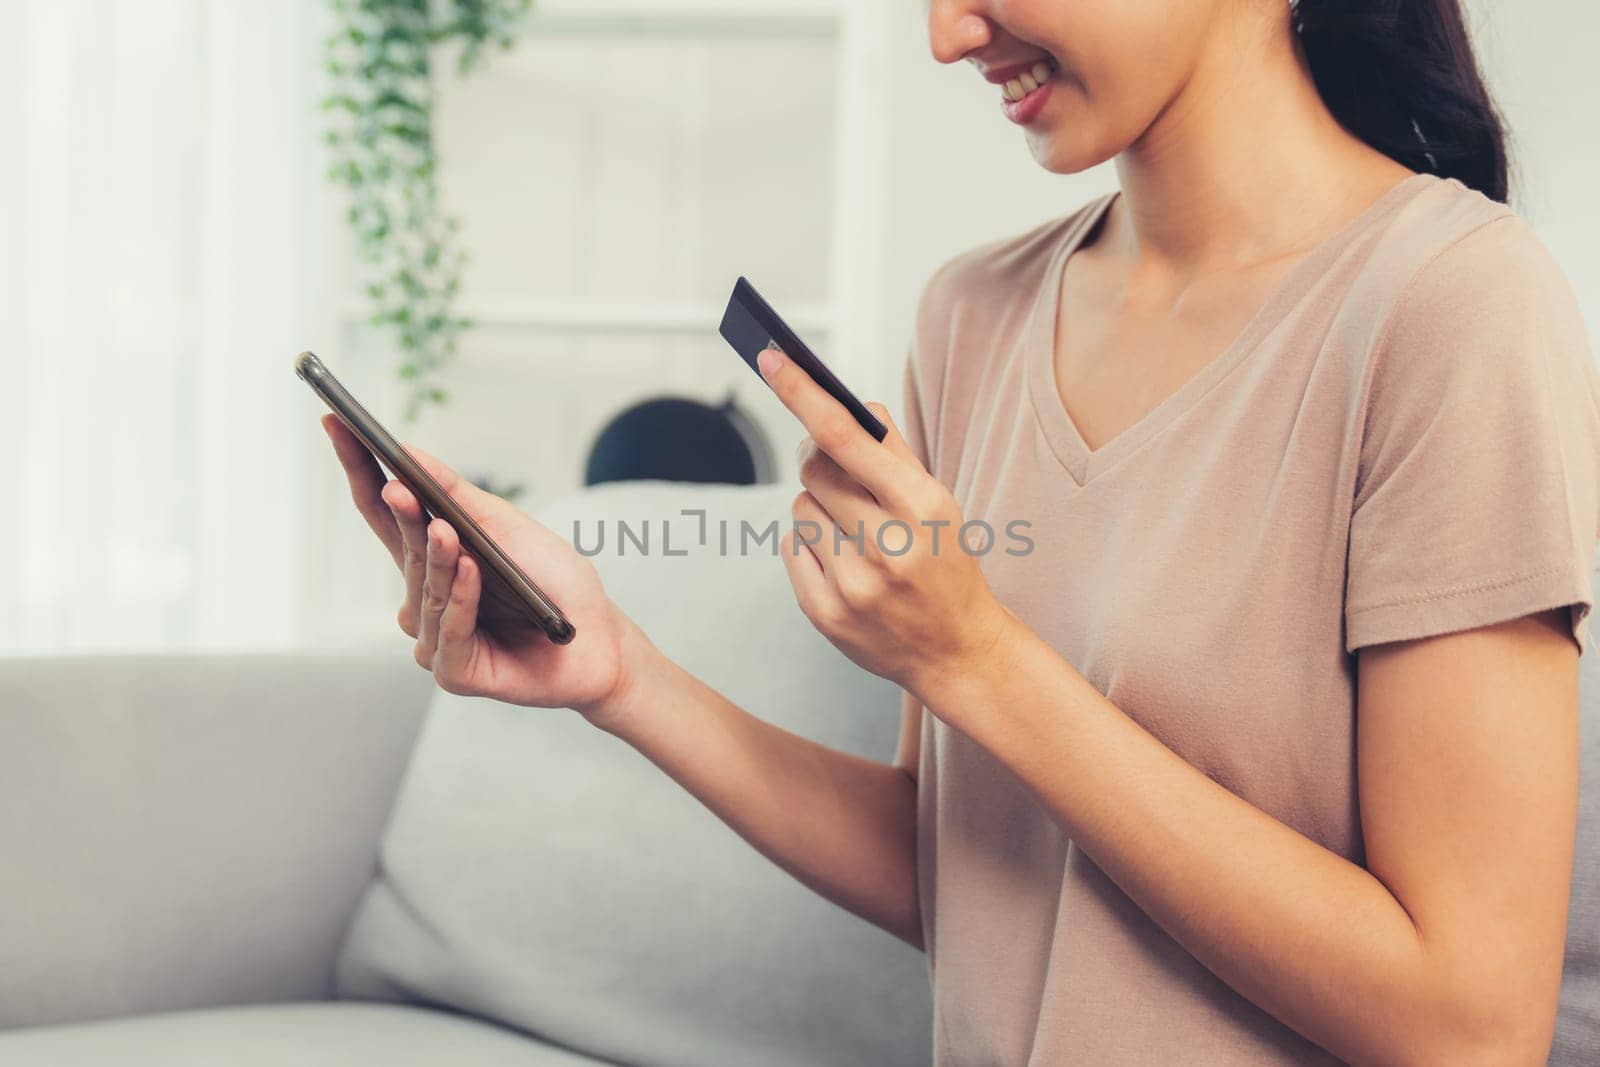 Contented young woman eagerly makes an online purchase using her smartphone. E-commerce business, online purchasing.